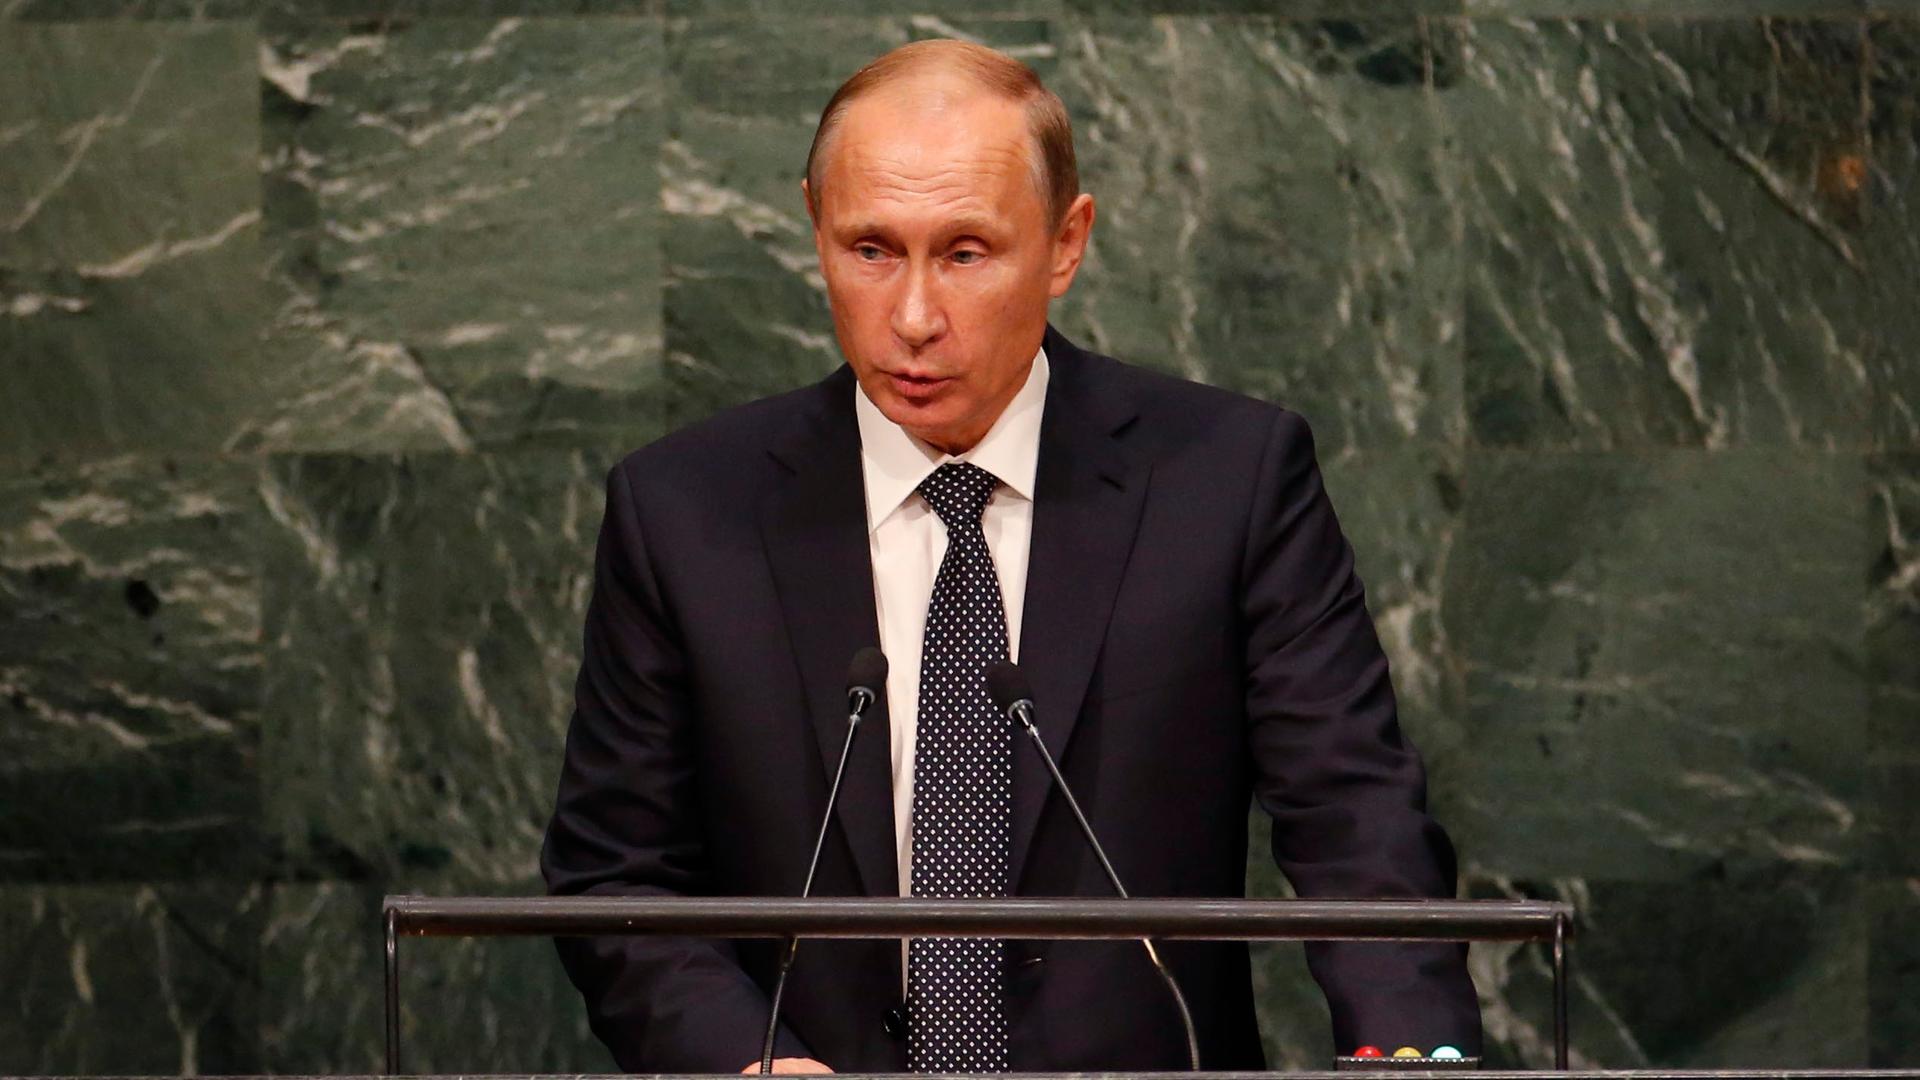 Russian President Vladimir Putin addresses attendees during the 70th session of the United Nations General Assembly at the UN Headquarters in New York, September 28, 2015.